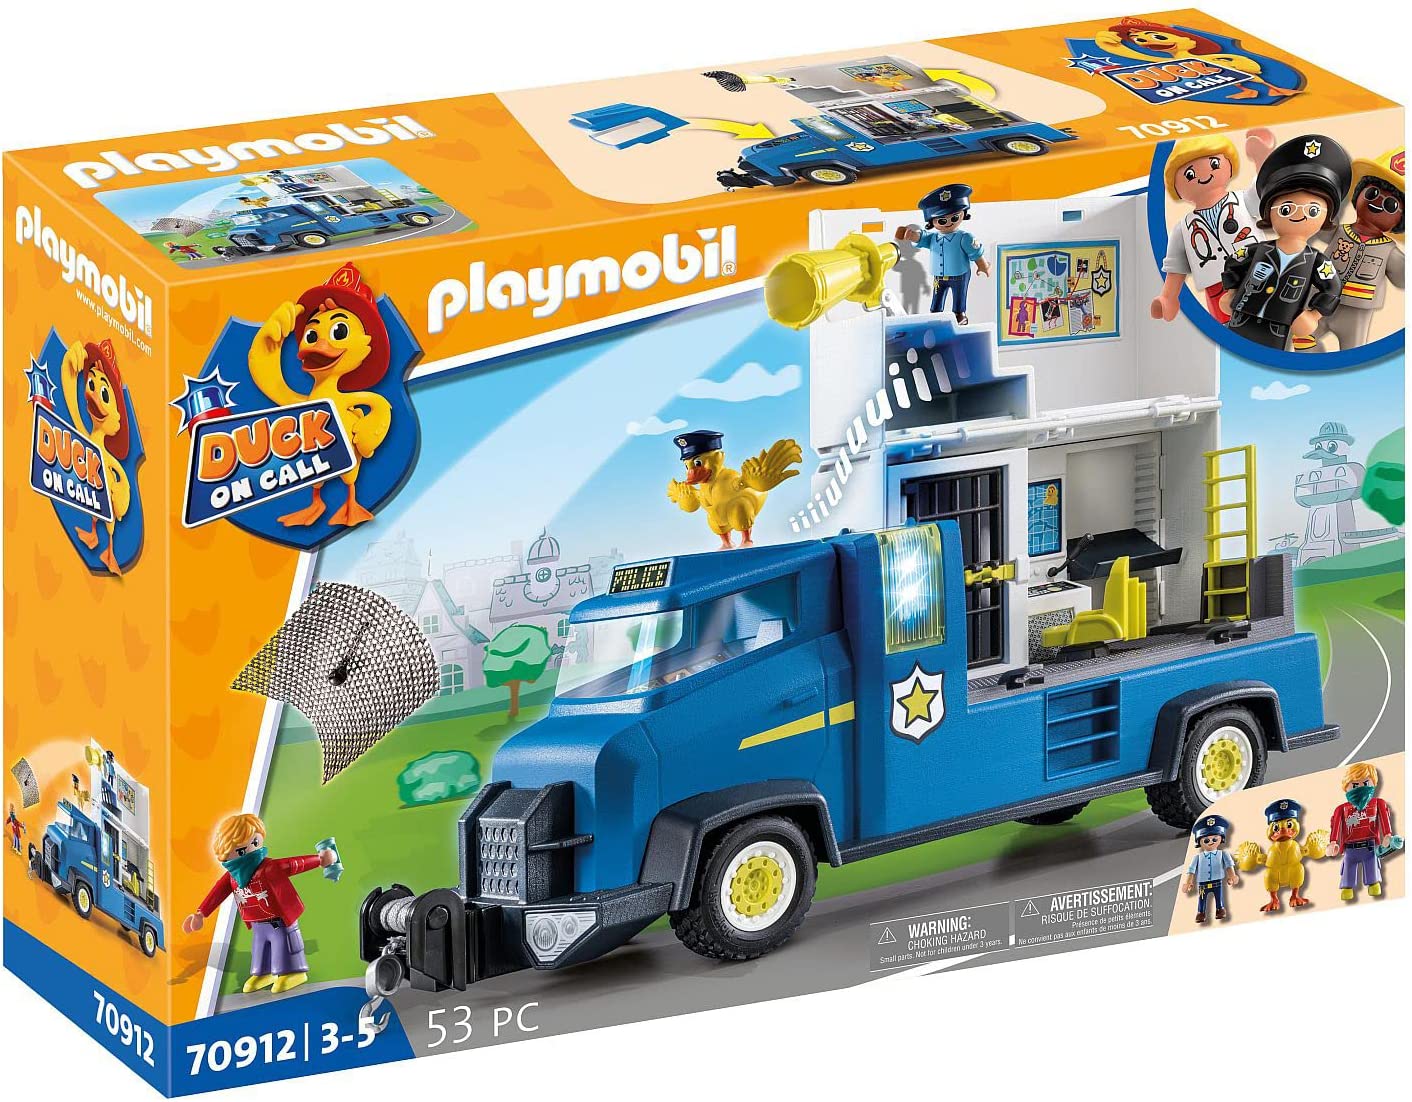 PLAYMOBIL Duck On Call 70912 Police Truck with Centre, Light and Sound, Toy for Children from 3 Years